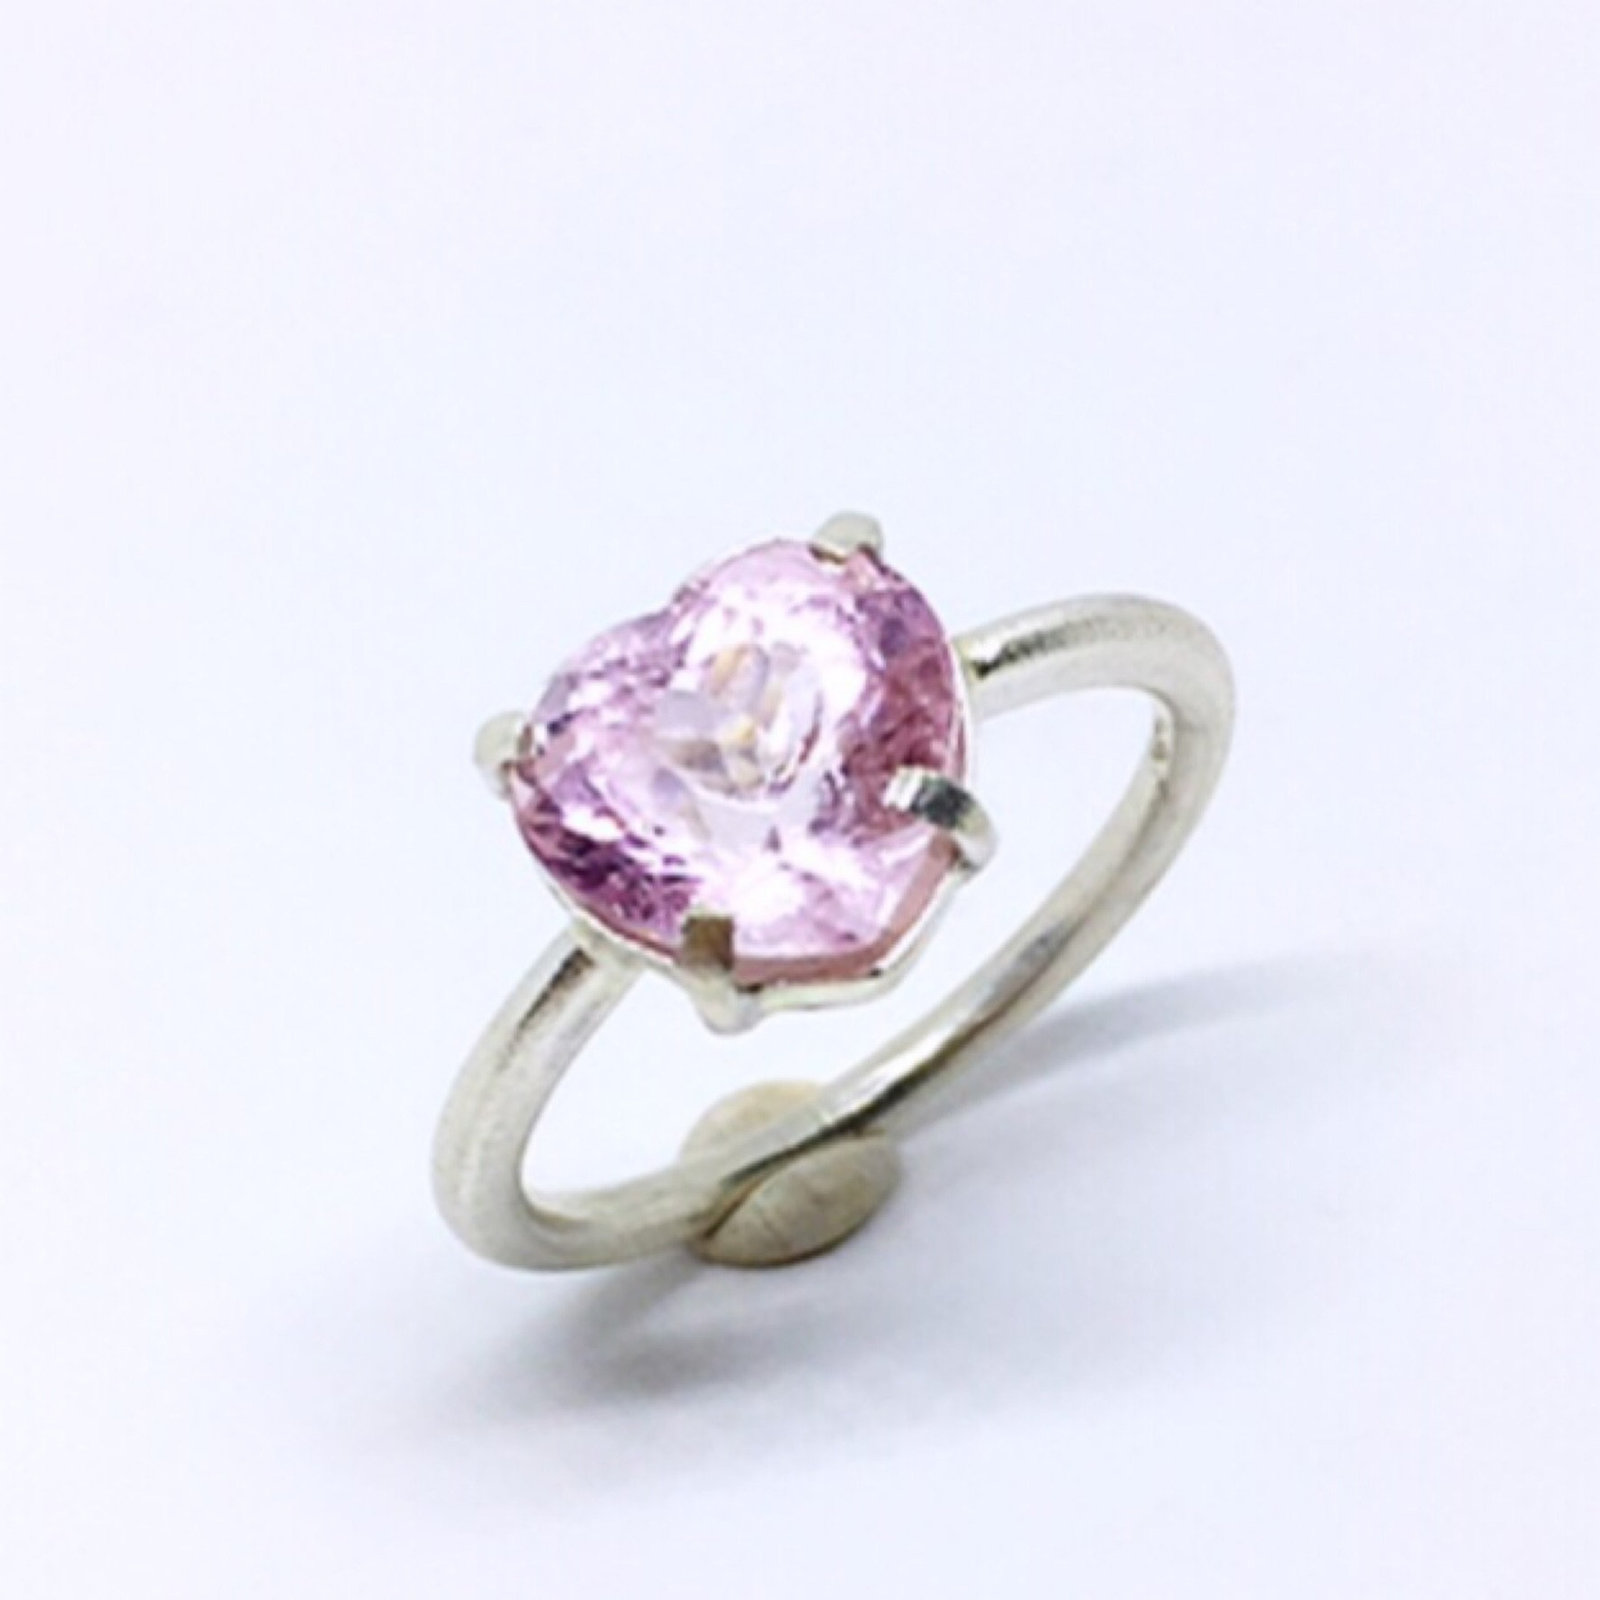 Primary image for Dainty sterling silver ring with a beautiful 3.31 carats Pink Tourmaline